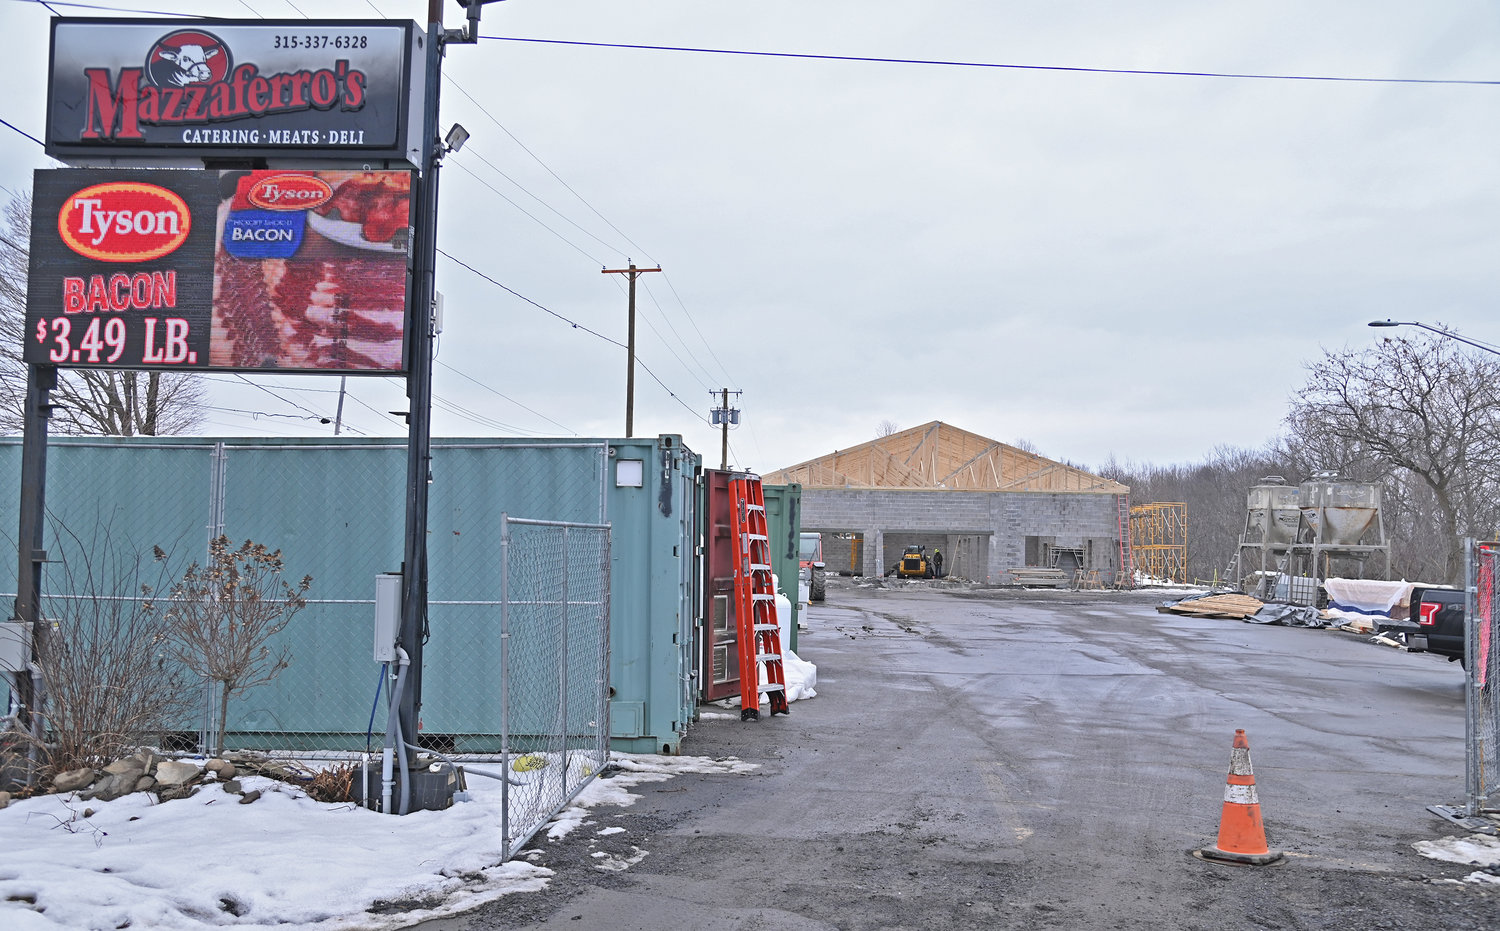 Mazzaferro's marquee with the new building going up in the background Monday, February 6, 2023.